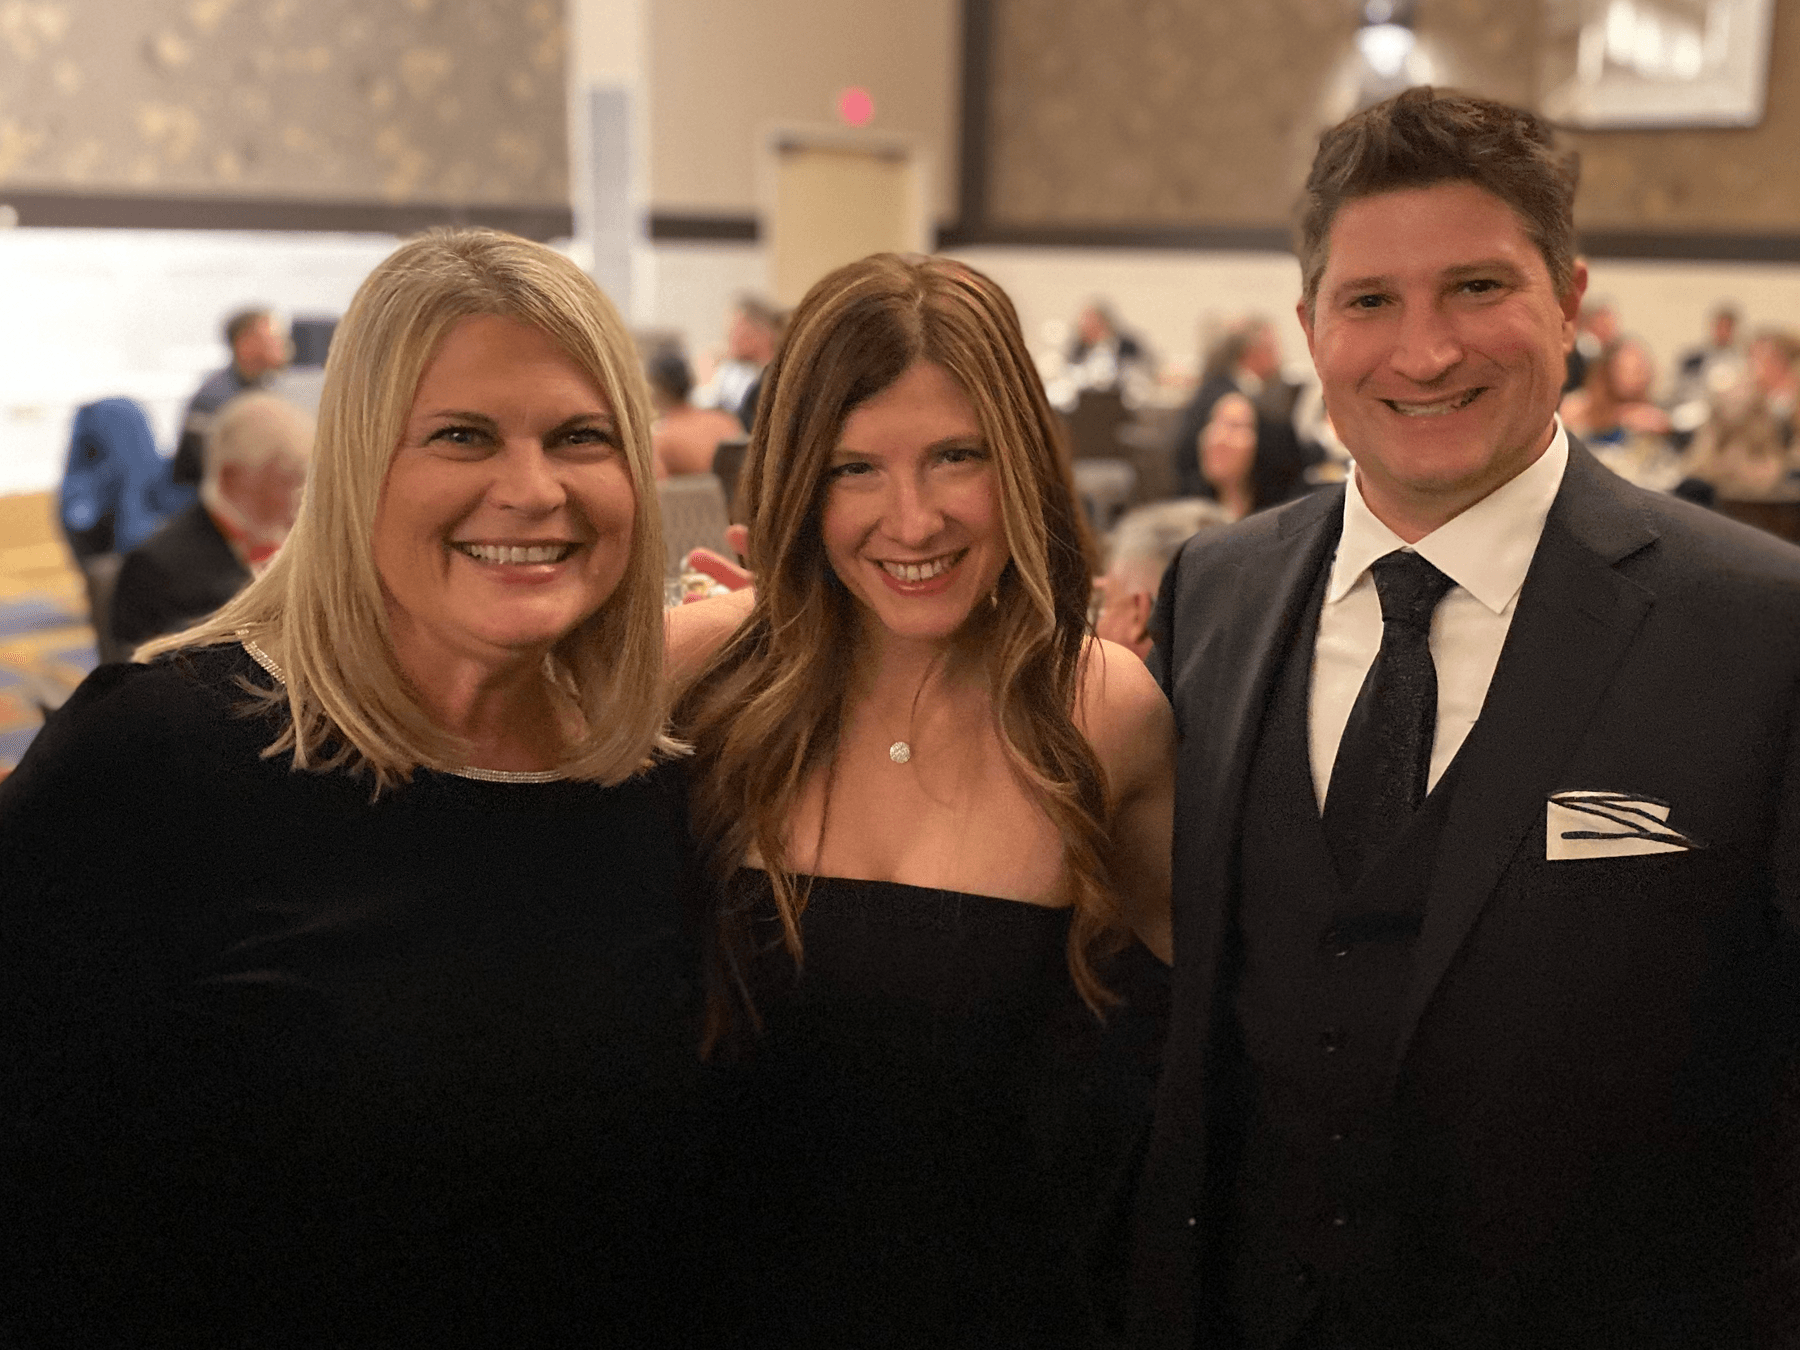 Candlelight Ball raises nearly $165,000 for The Research Foundation’s health-centered programs